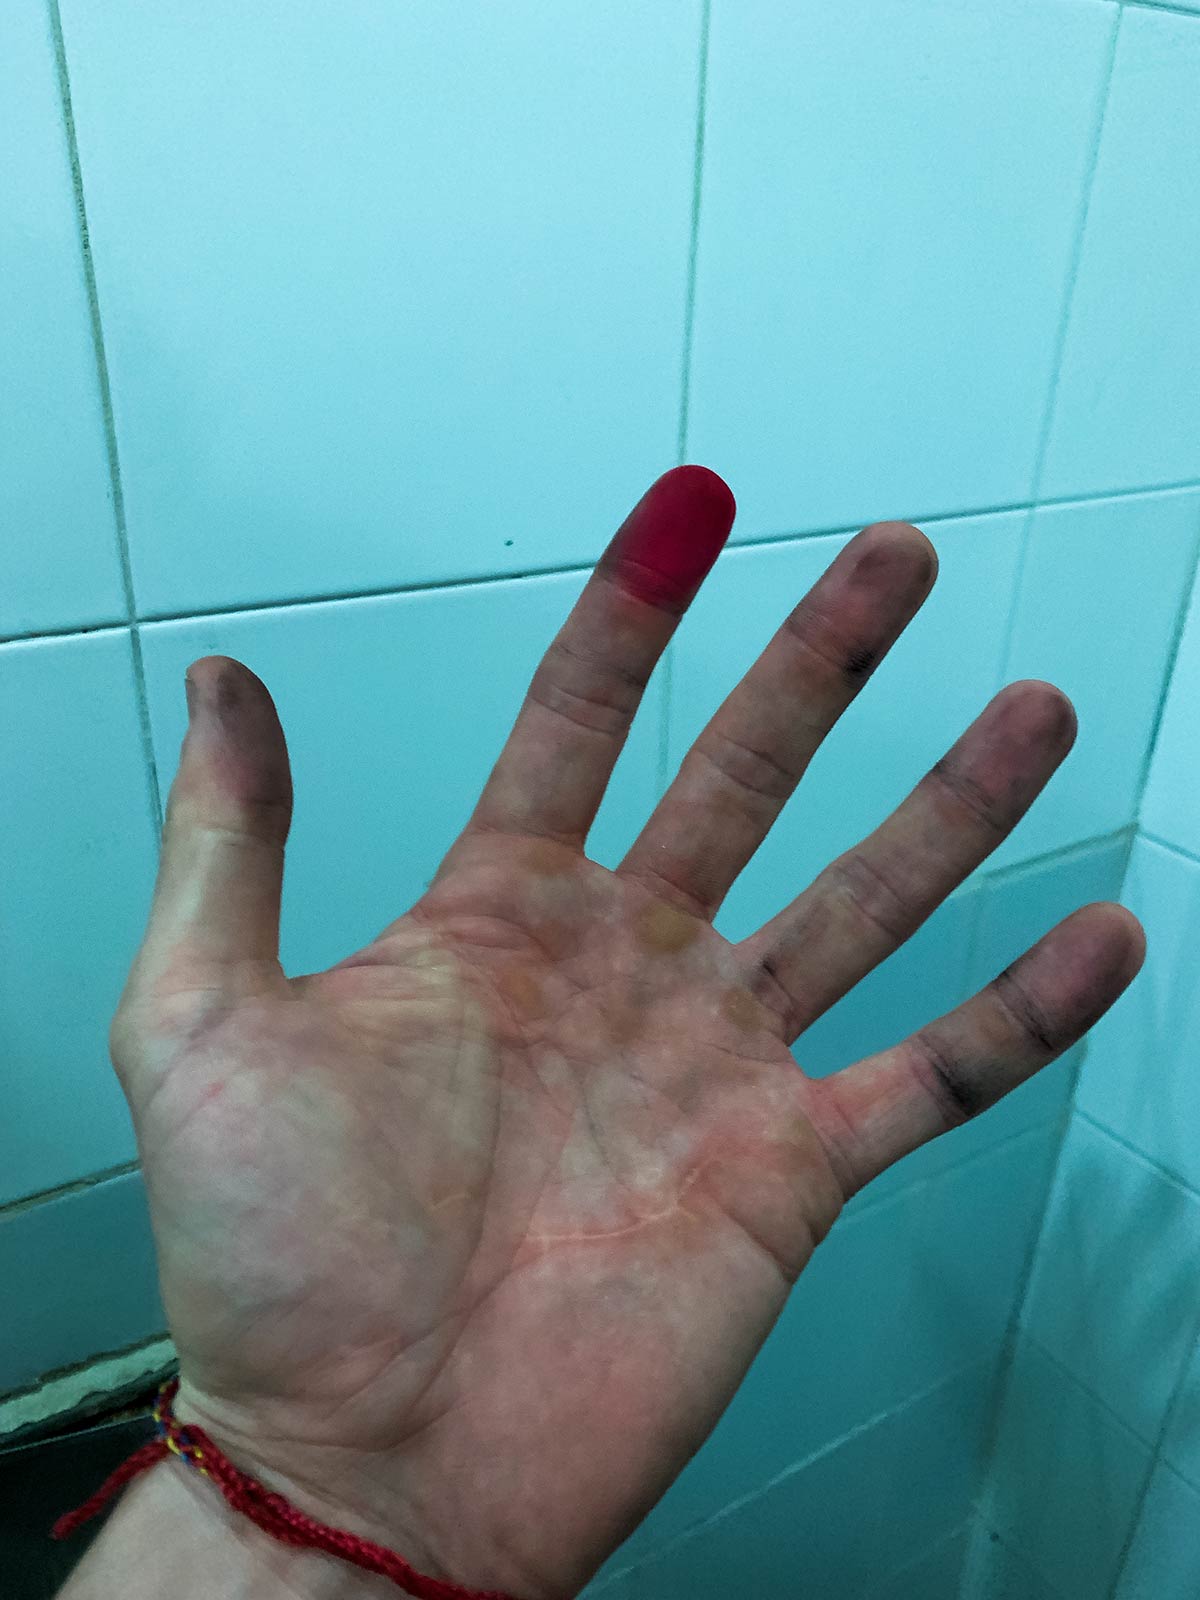 Dirty right hand after finger printing in Algiers, Algeria. 5 hours in an Algerian police station